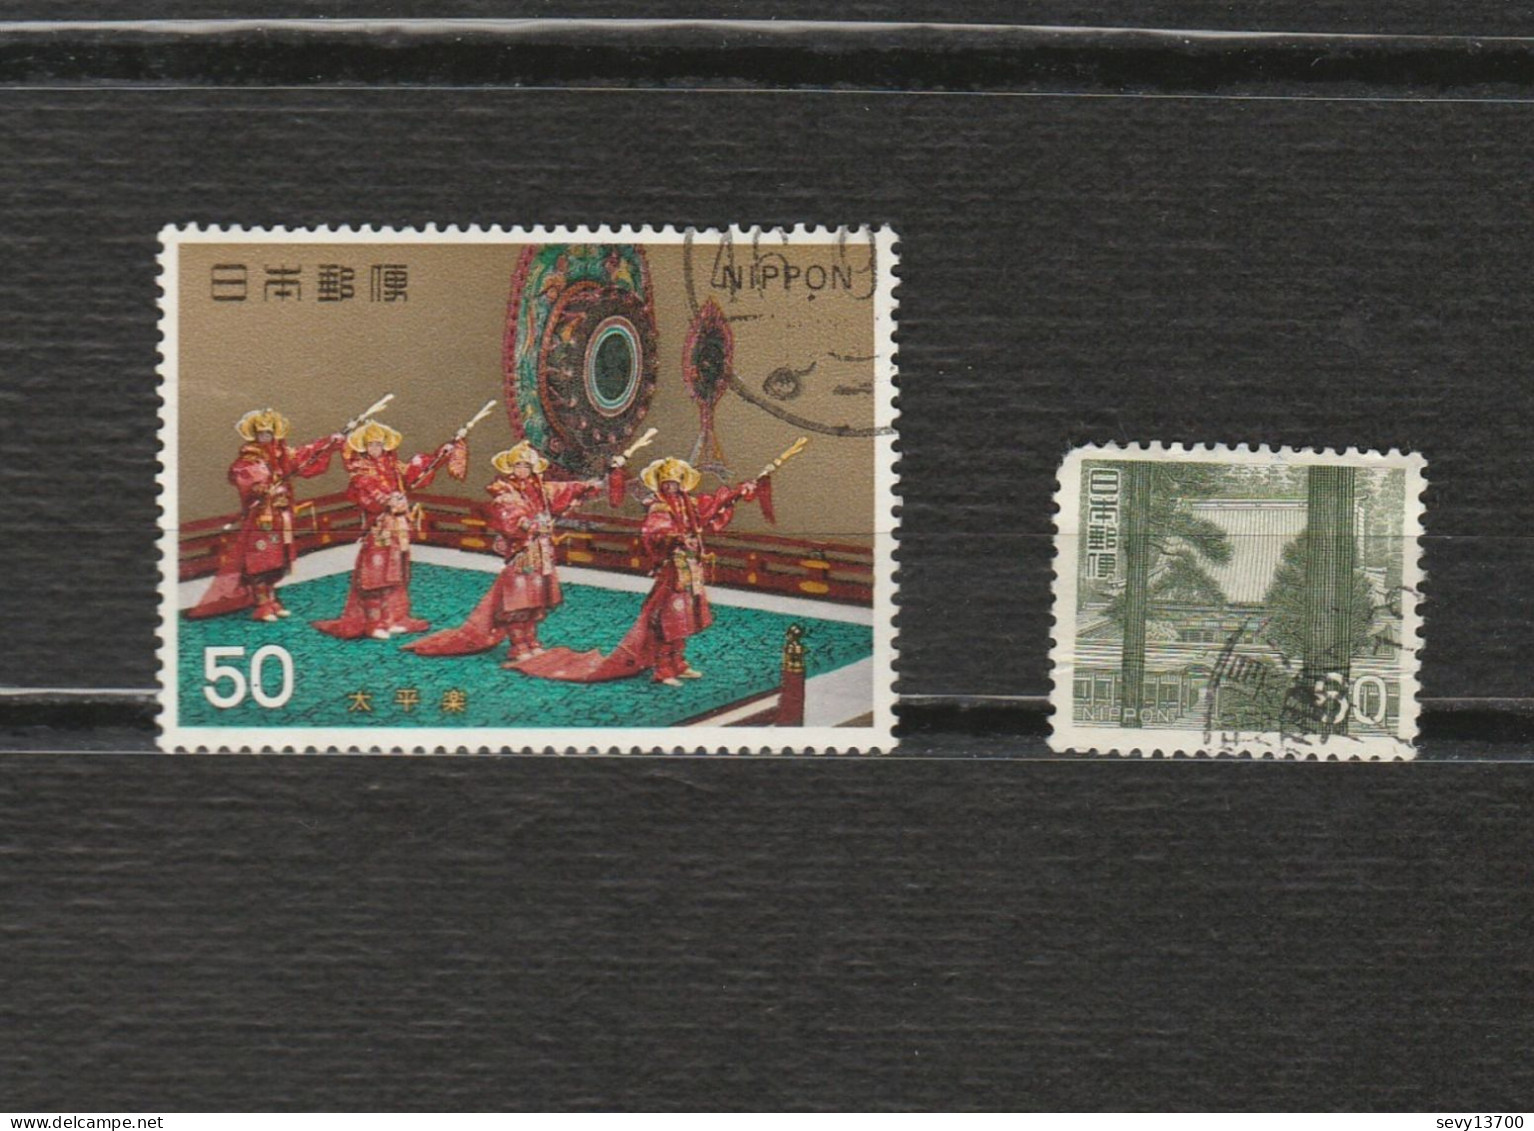 Japon 22 Timbres YT 982, 941, 954, 869, 539, 842, 878, 1041, 753,821,791.952,783,1006,973,847A,847,564,1017,923,1019,841 - Collections, Lots & Series